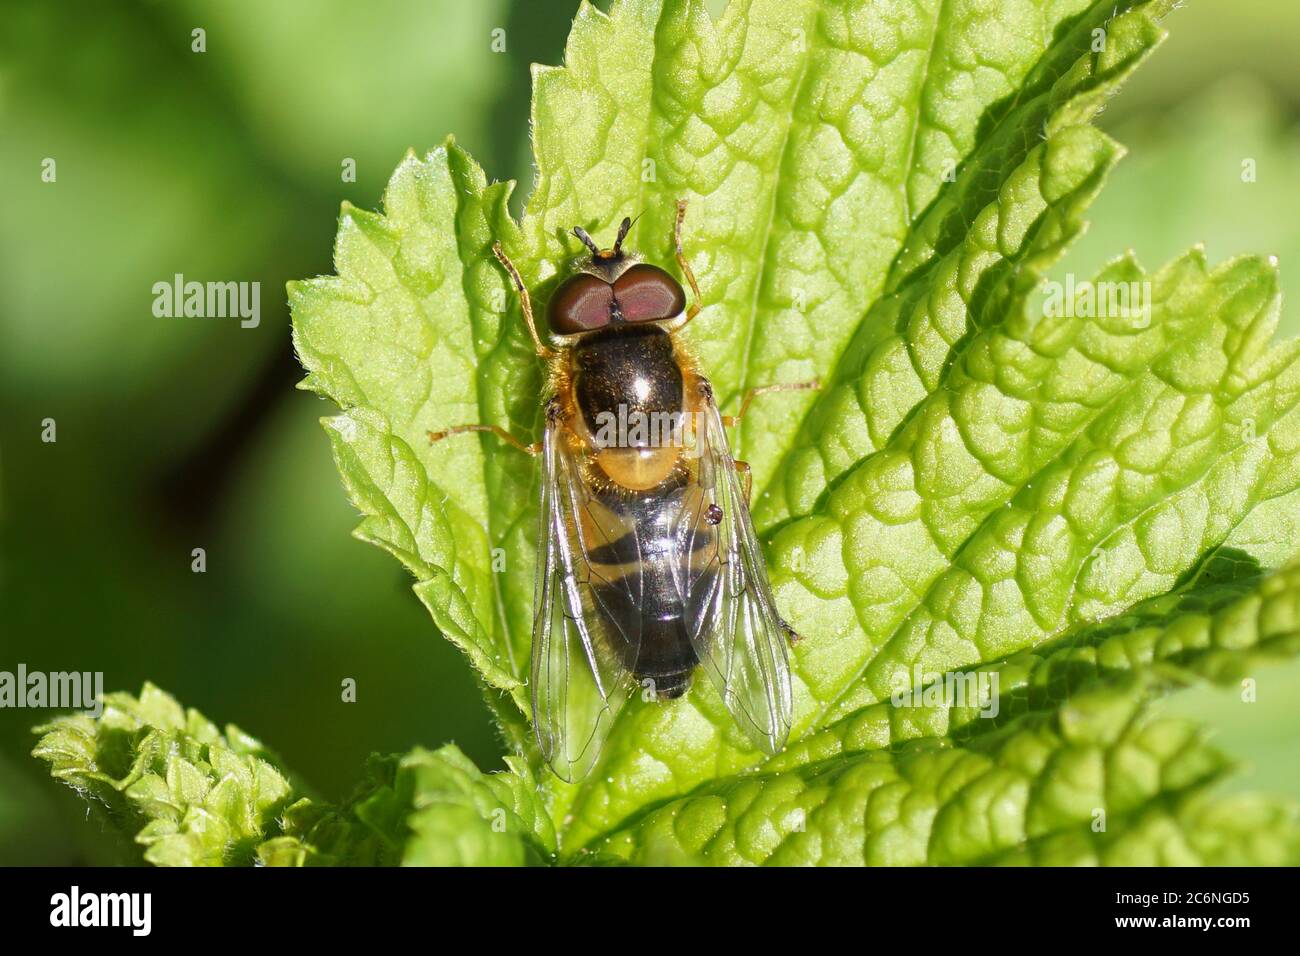 Male hoverfly Epistrophe eligans on a young leaf of a currant bush in the sun in the spring. Bergen, Netherlands April Stock Photo